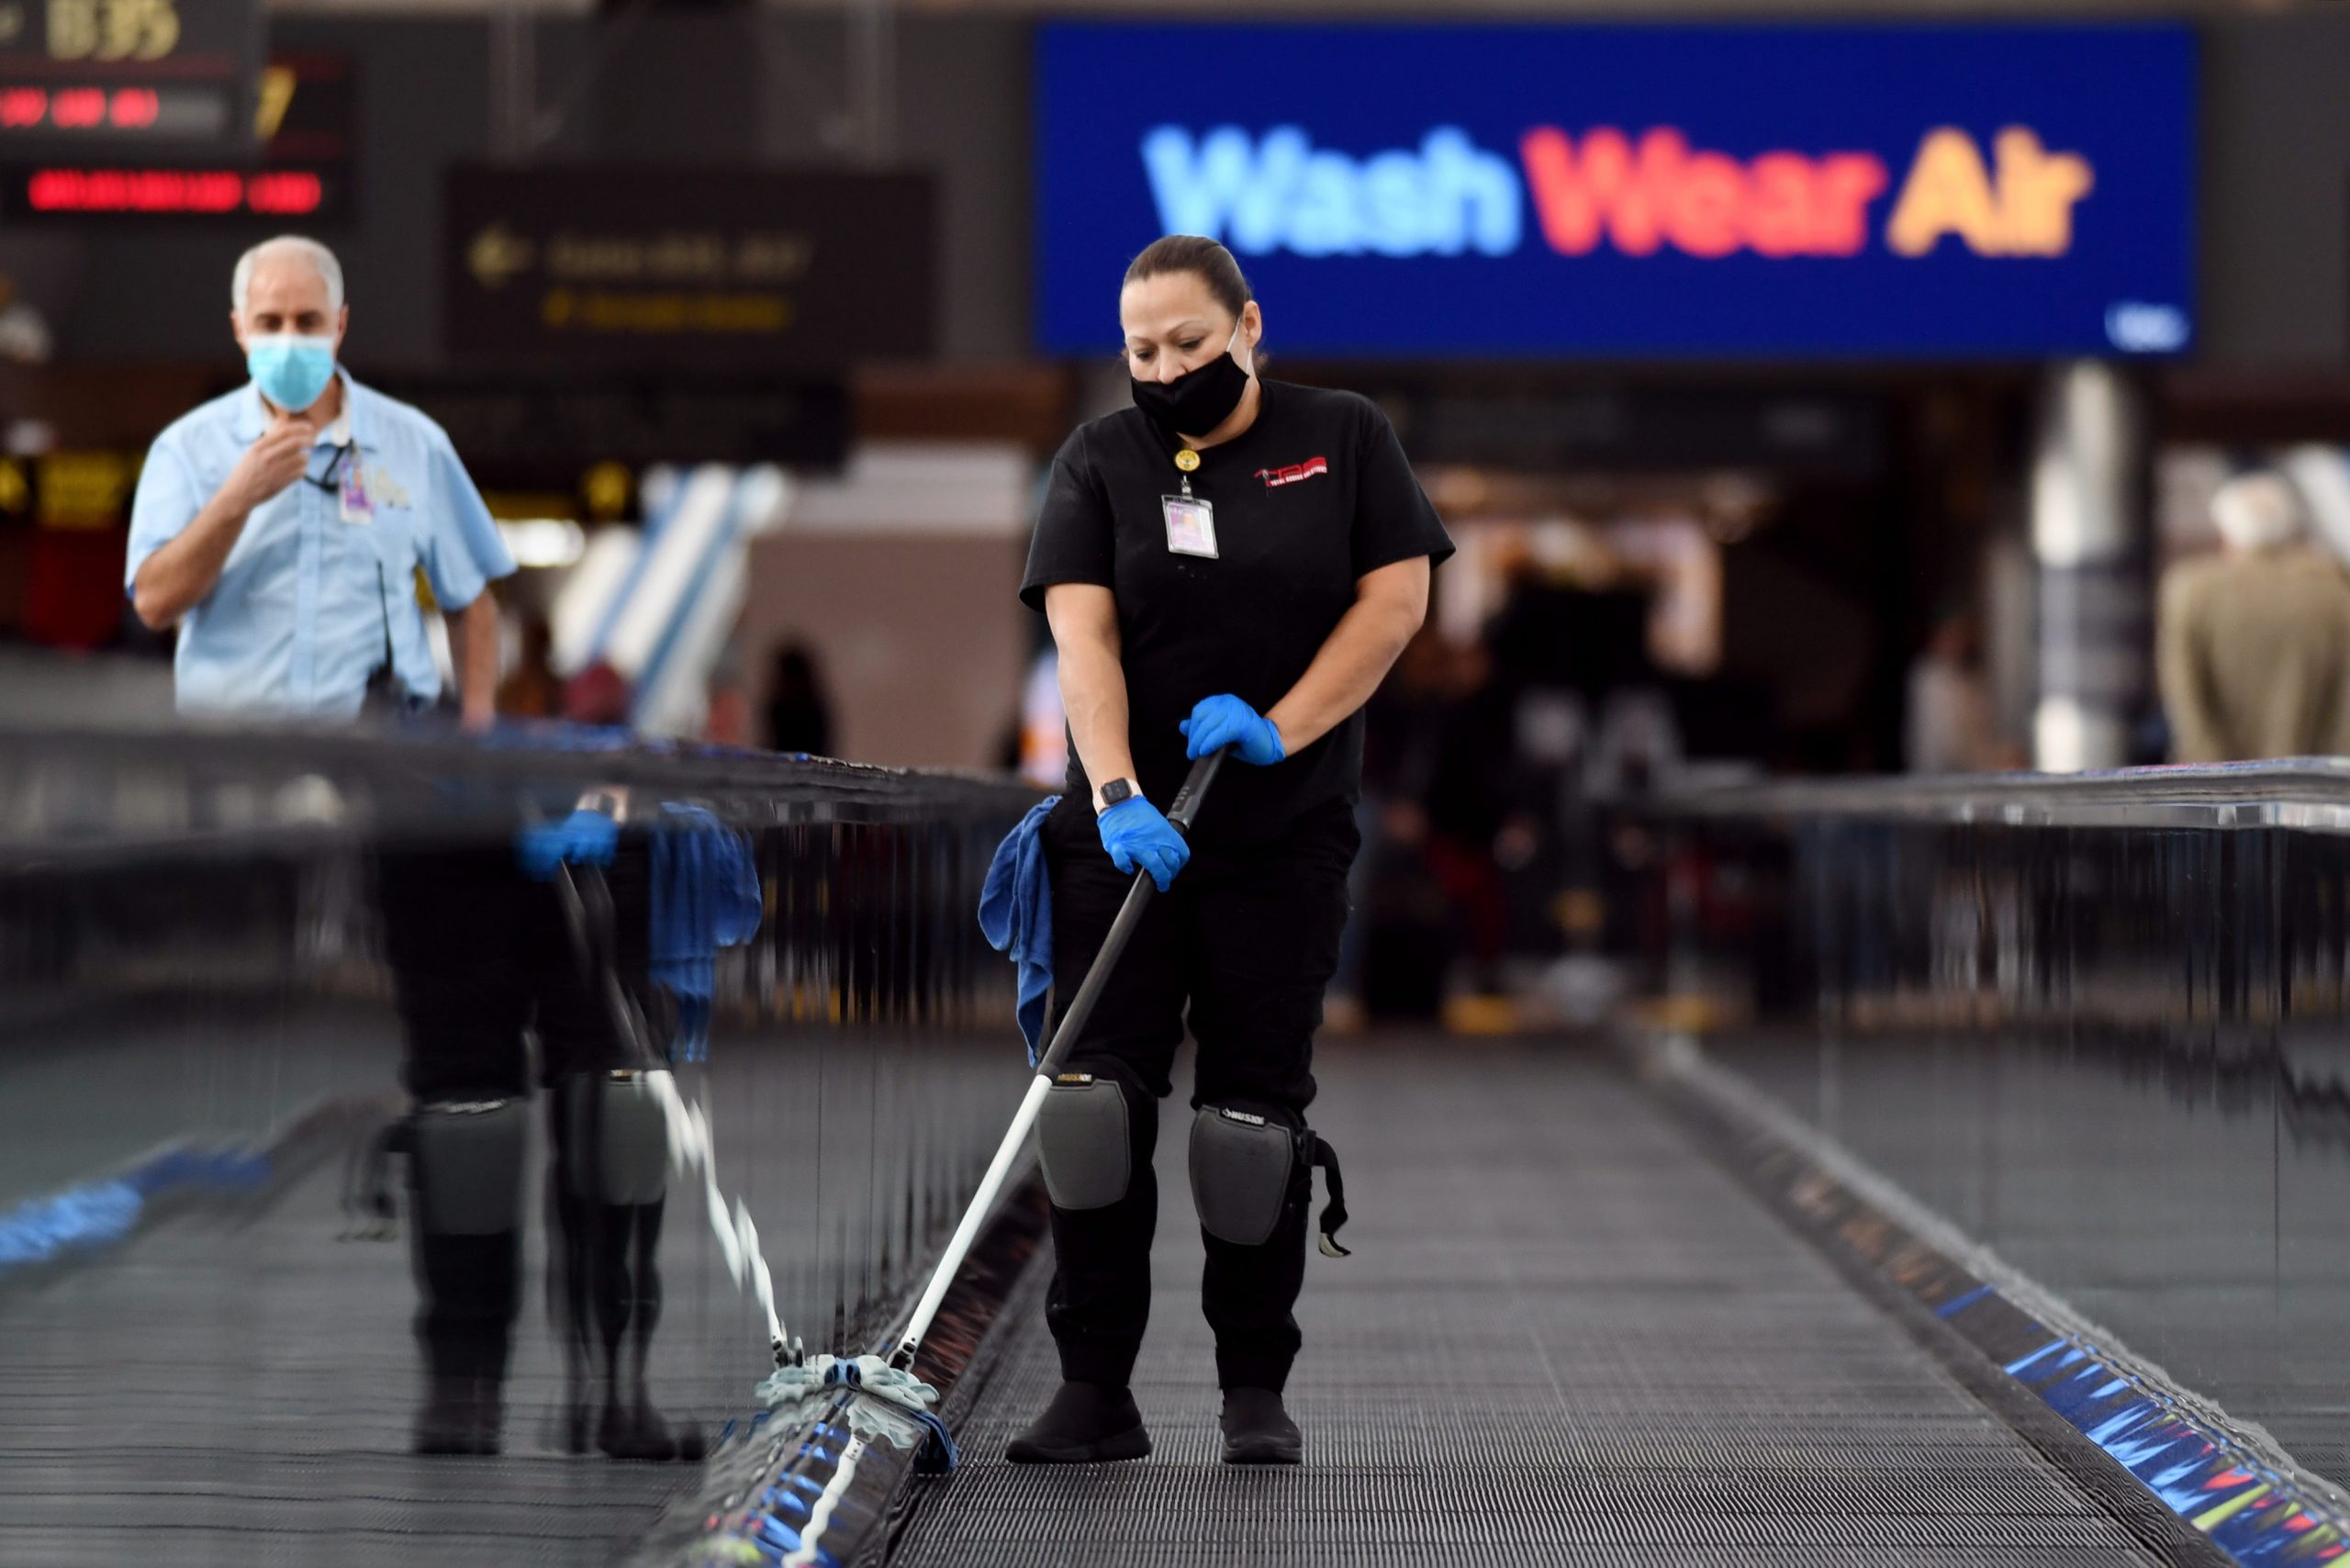 Janitor Mayra Hernandez, right, wiping hand rails at Concourse B of Denver International Airport in Denver, Colorado